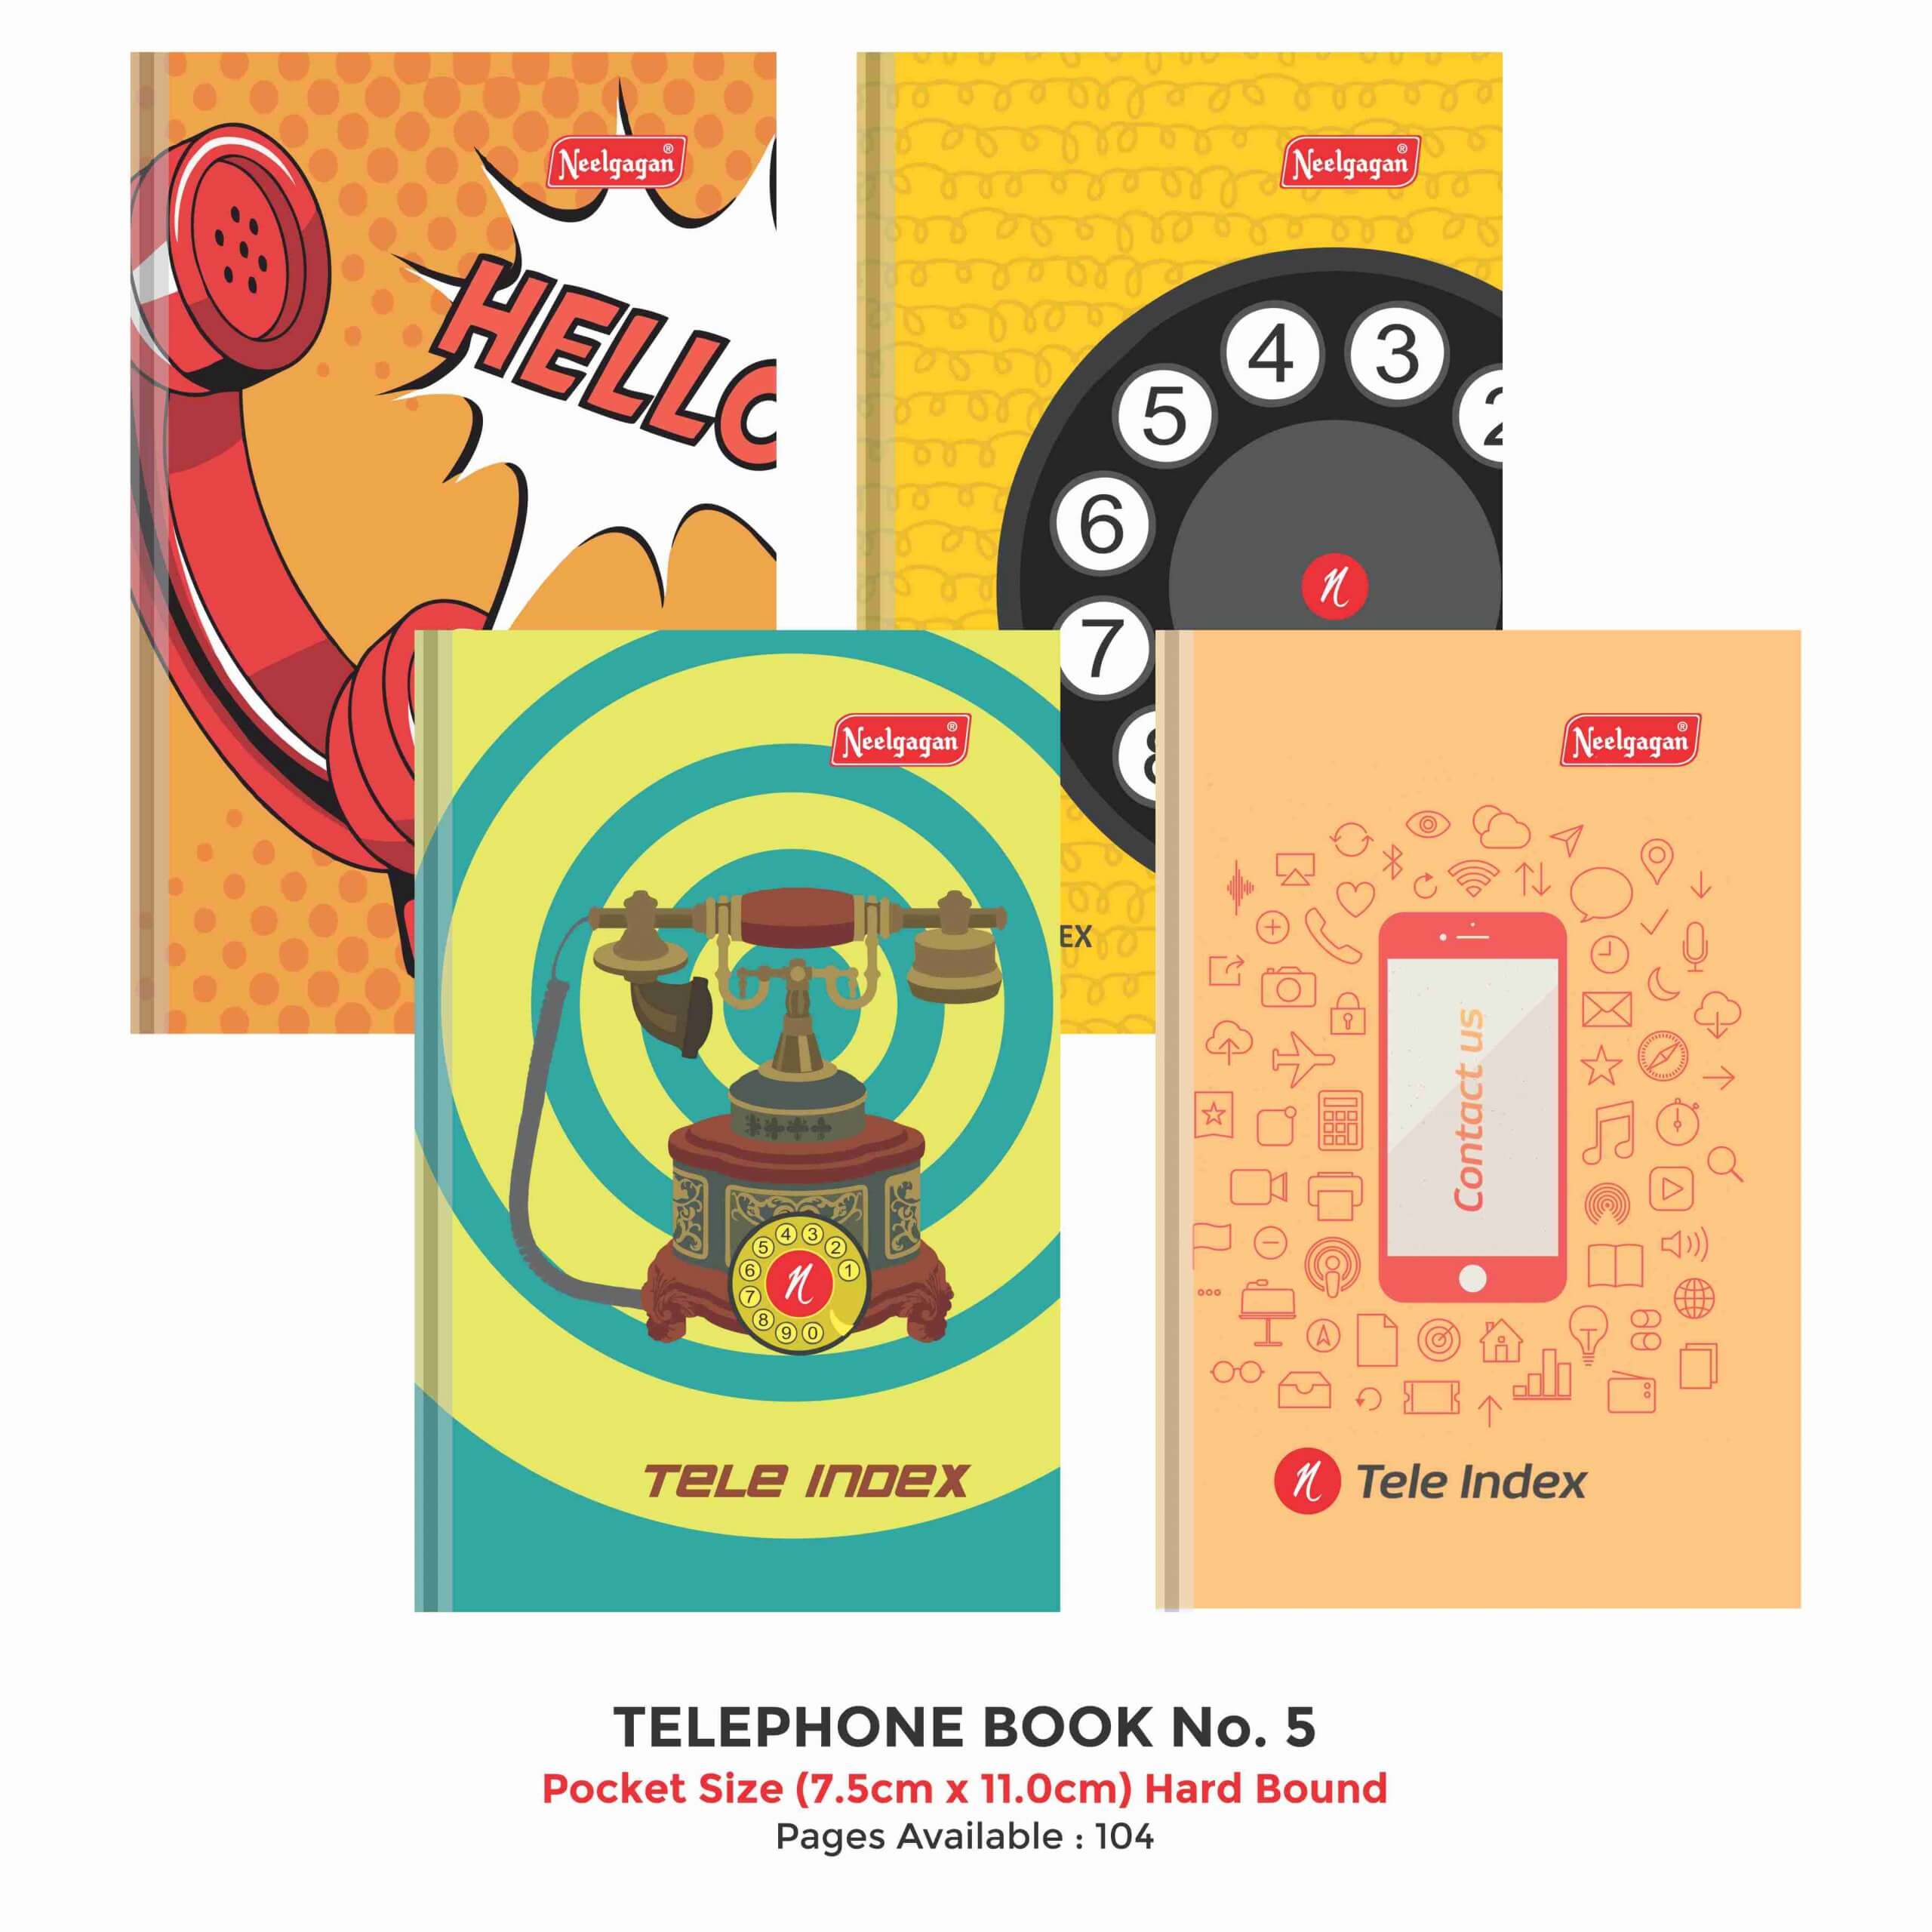 Telephone Book (Pocket Size) 104 pages, No.5 (7.5cm x 11.0cm) Hard Bound